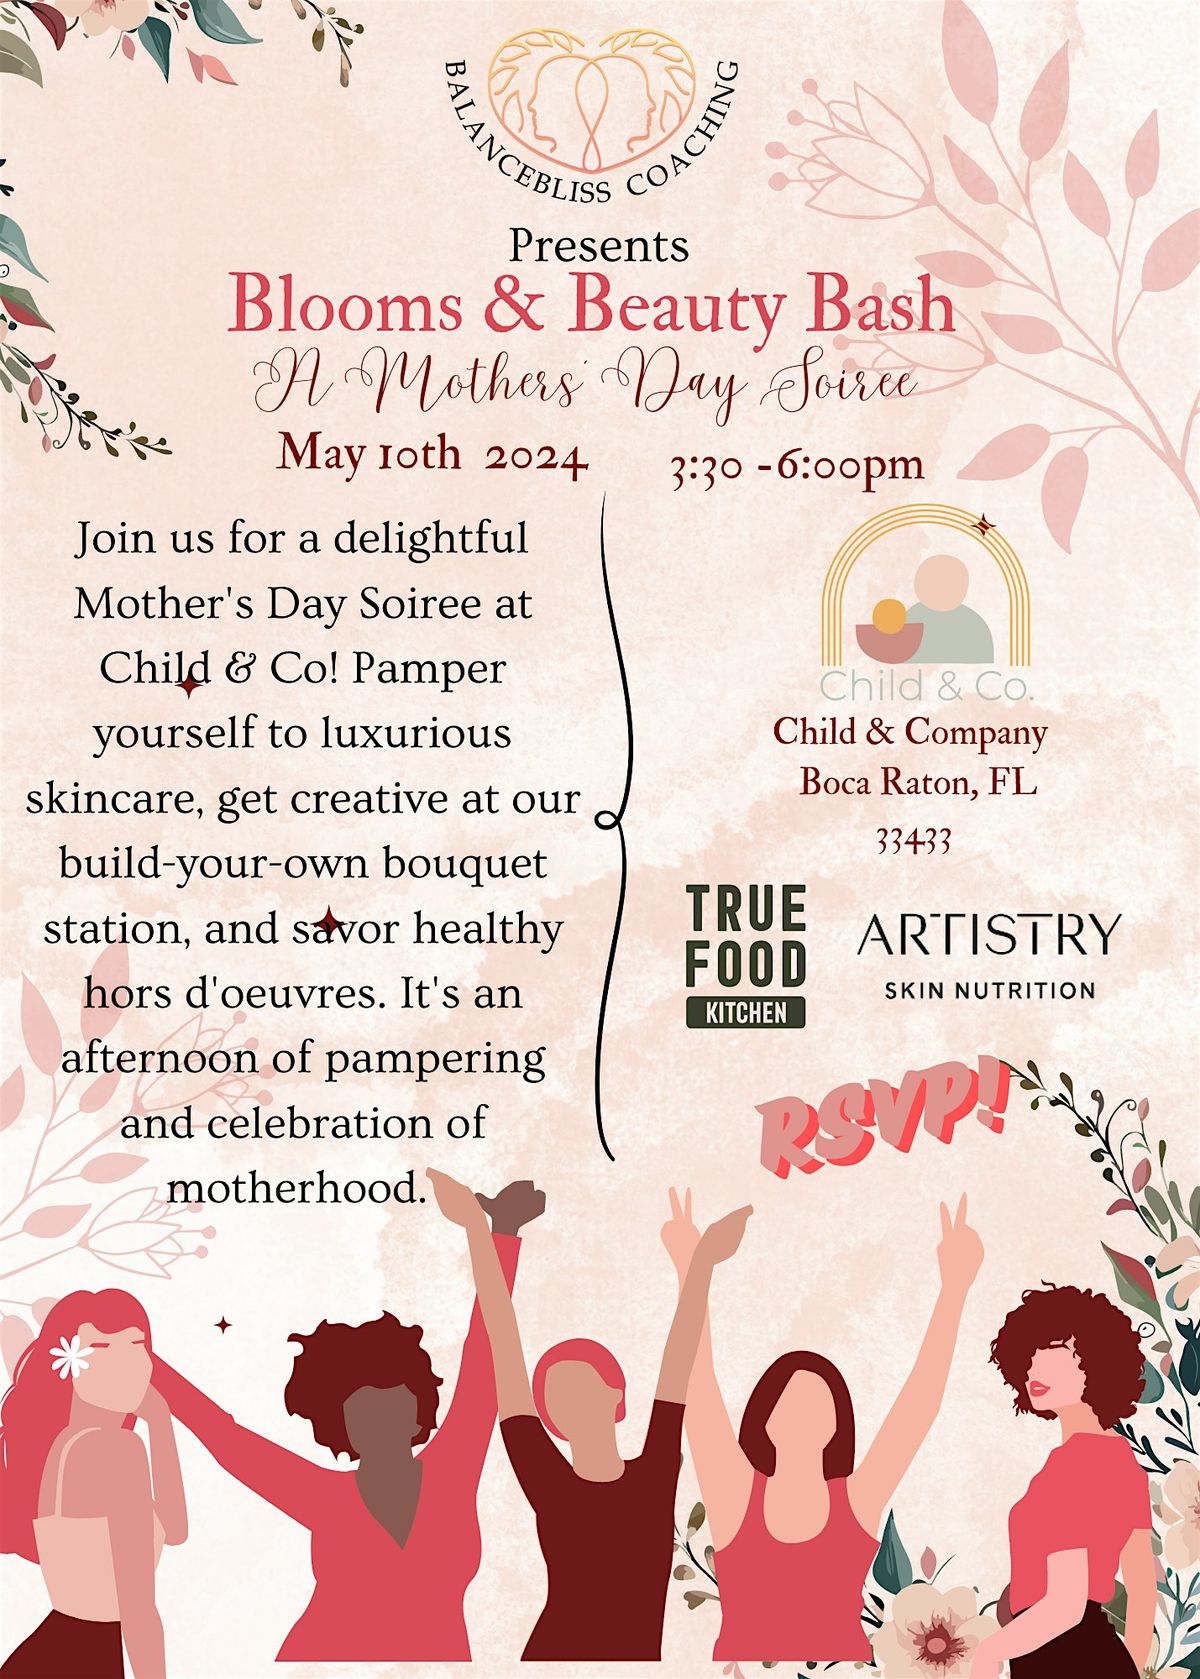 Blooms & Beauty Bash: A Mother's Day Soiree